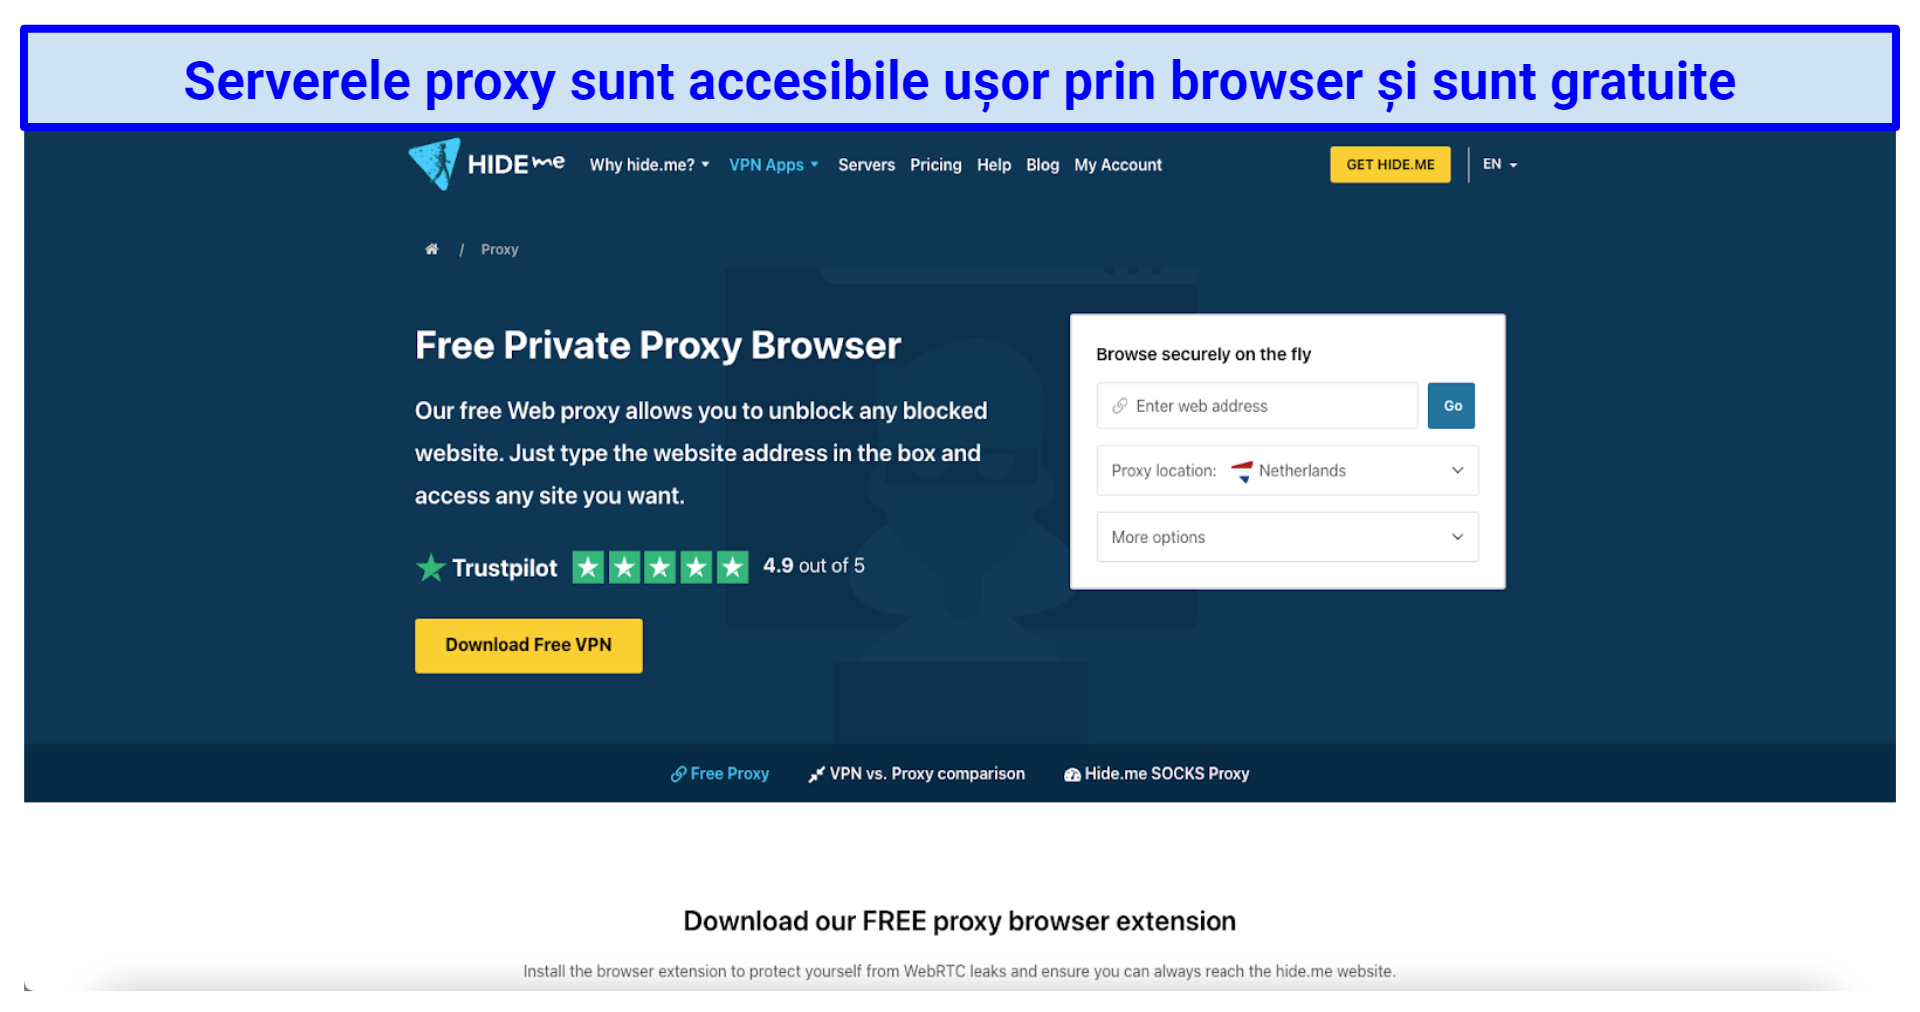 Graphic showing hideme's proxy browser homepage